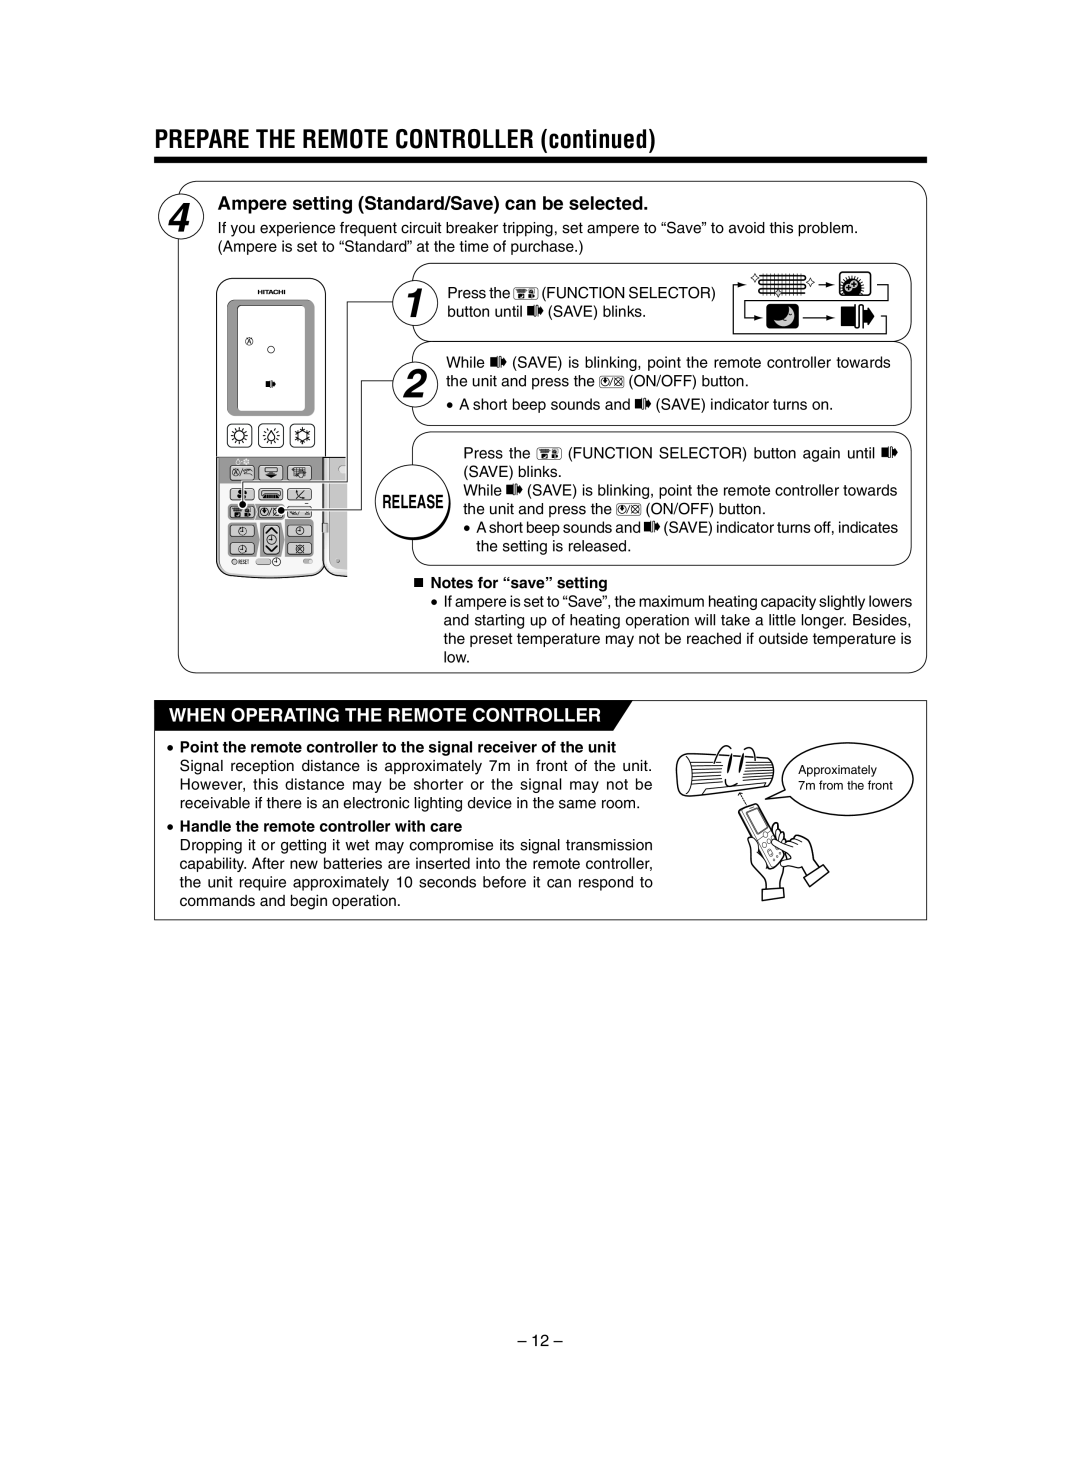 Hitachi RAS-SX13HAK / RAC-SX13HAK PREPARE THE REMOTE CONTROLLER continued, Ampere setting Standard/Save can be selected 